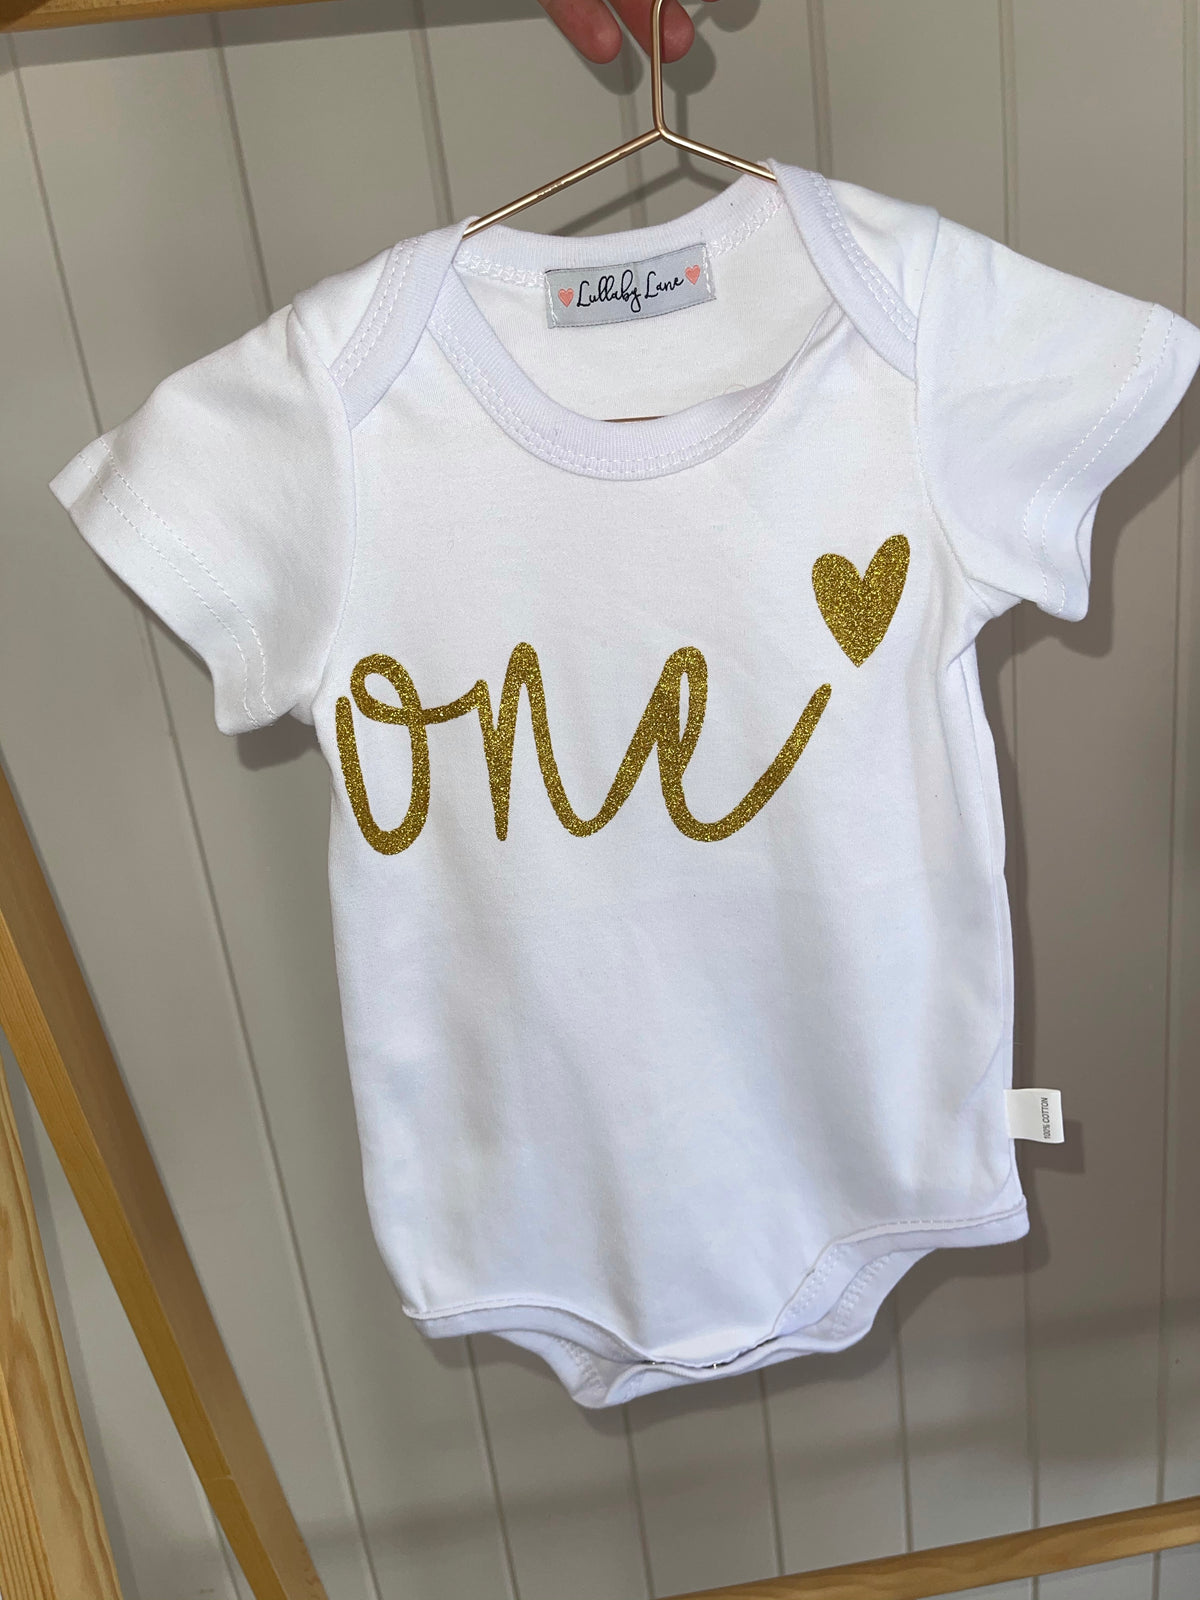 Gold Sparkly One Bodysuit - Excess Stock